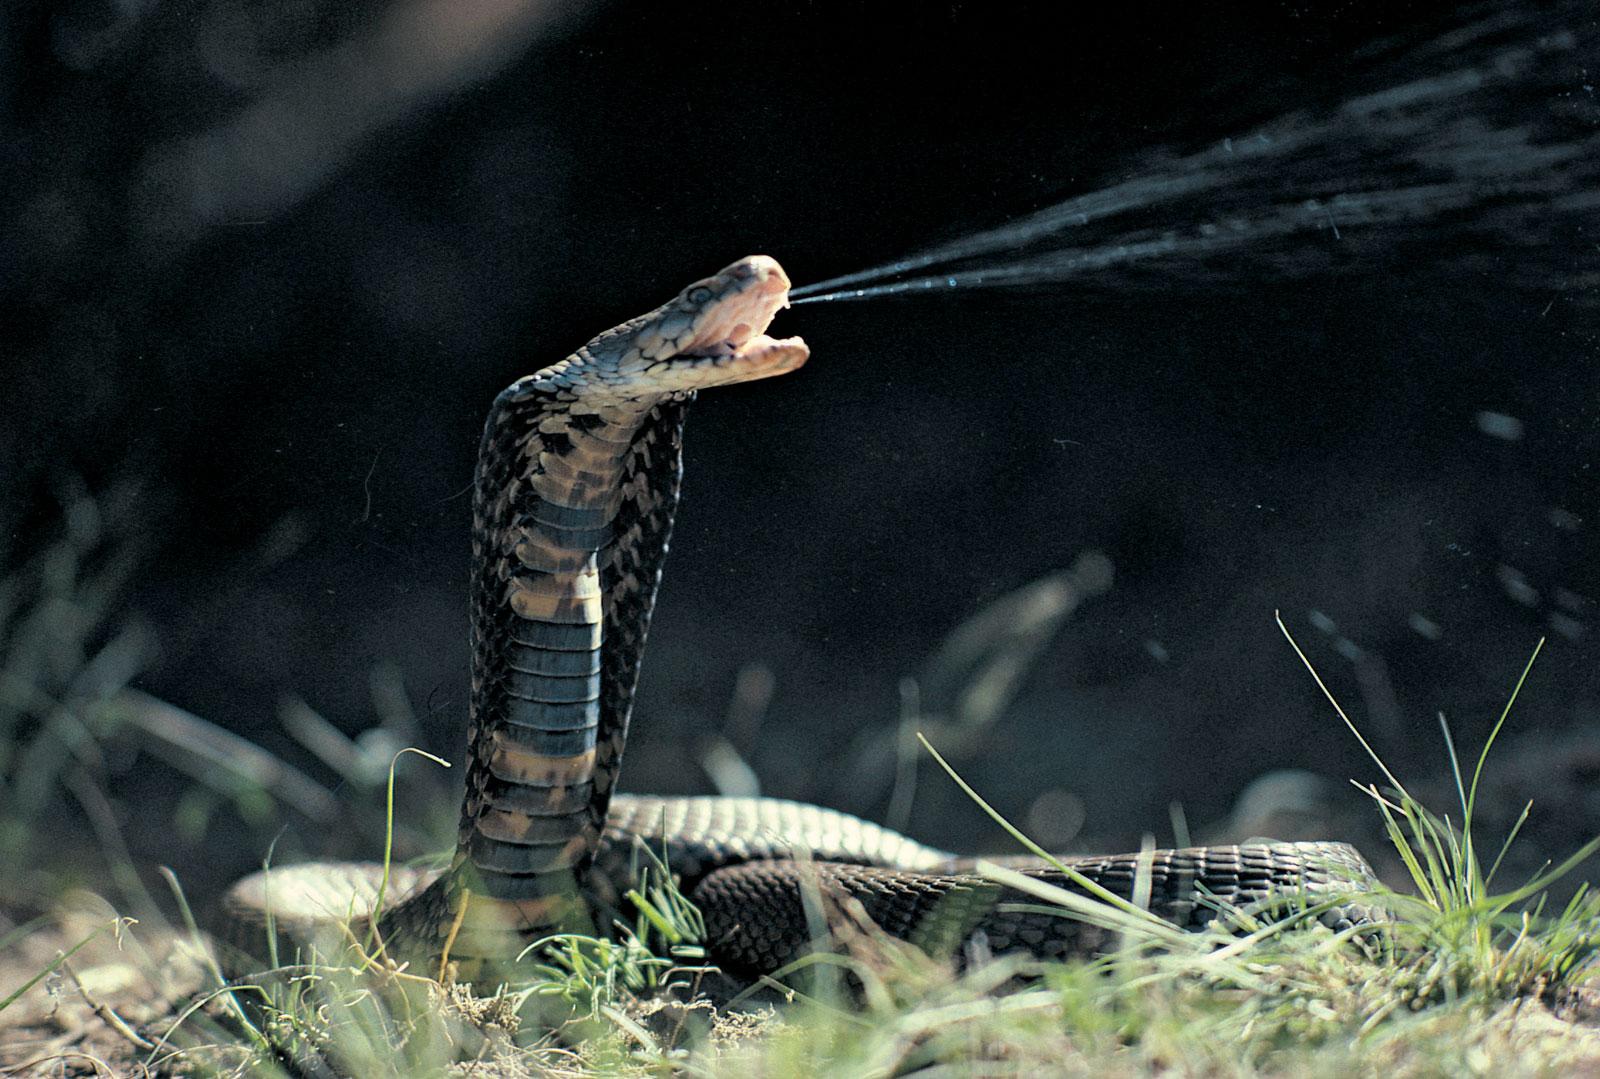 of the World's Deadliest Snakes